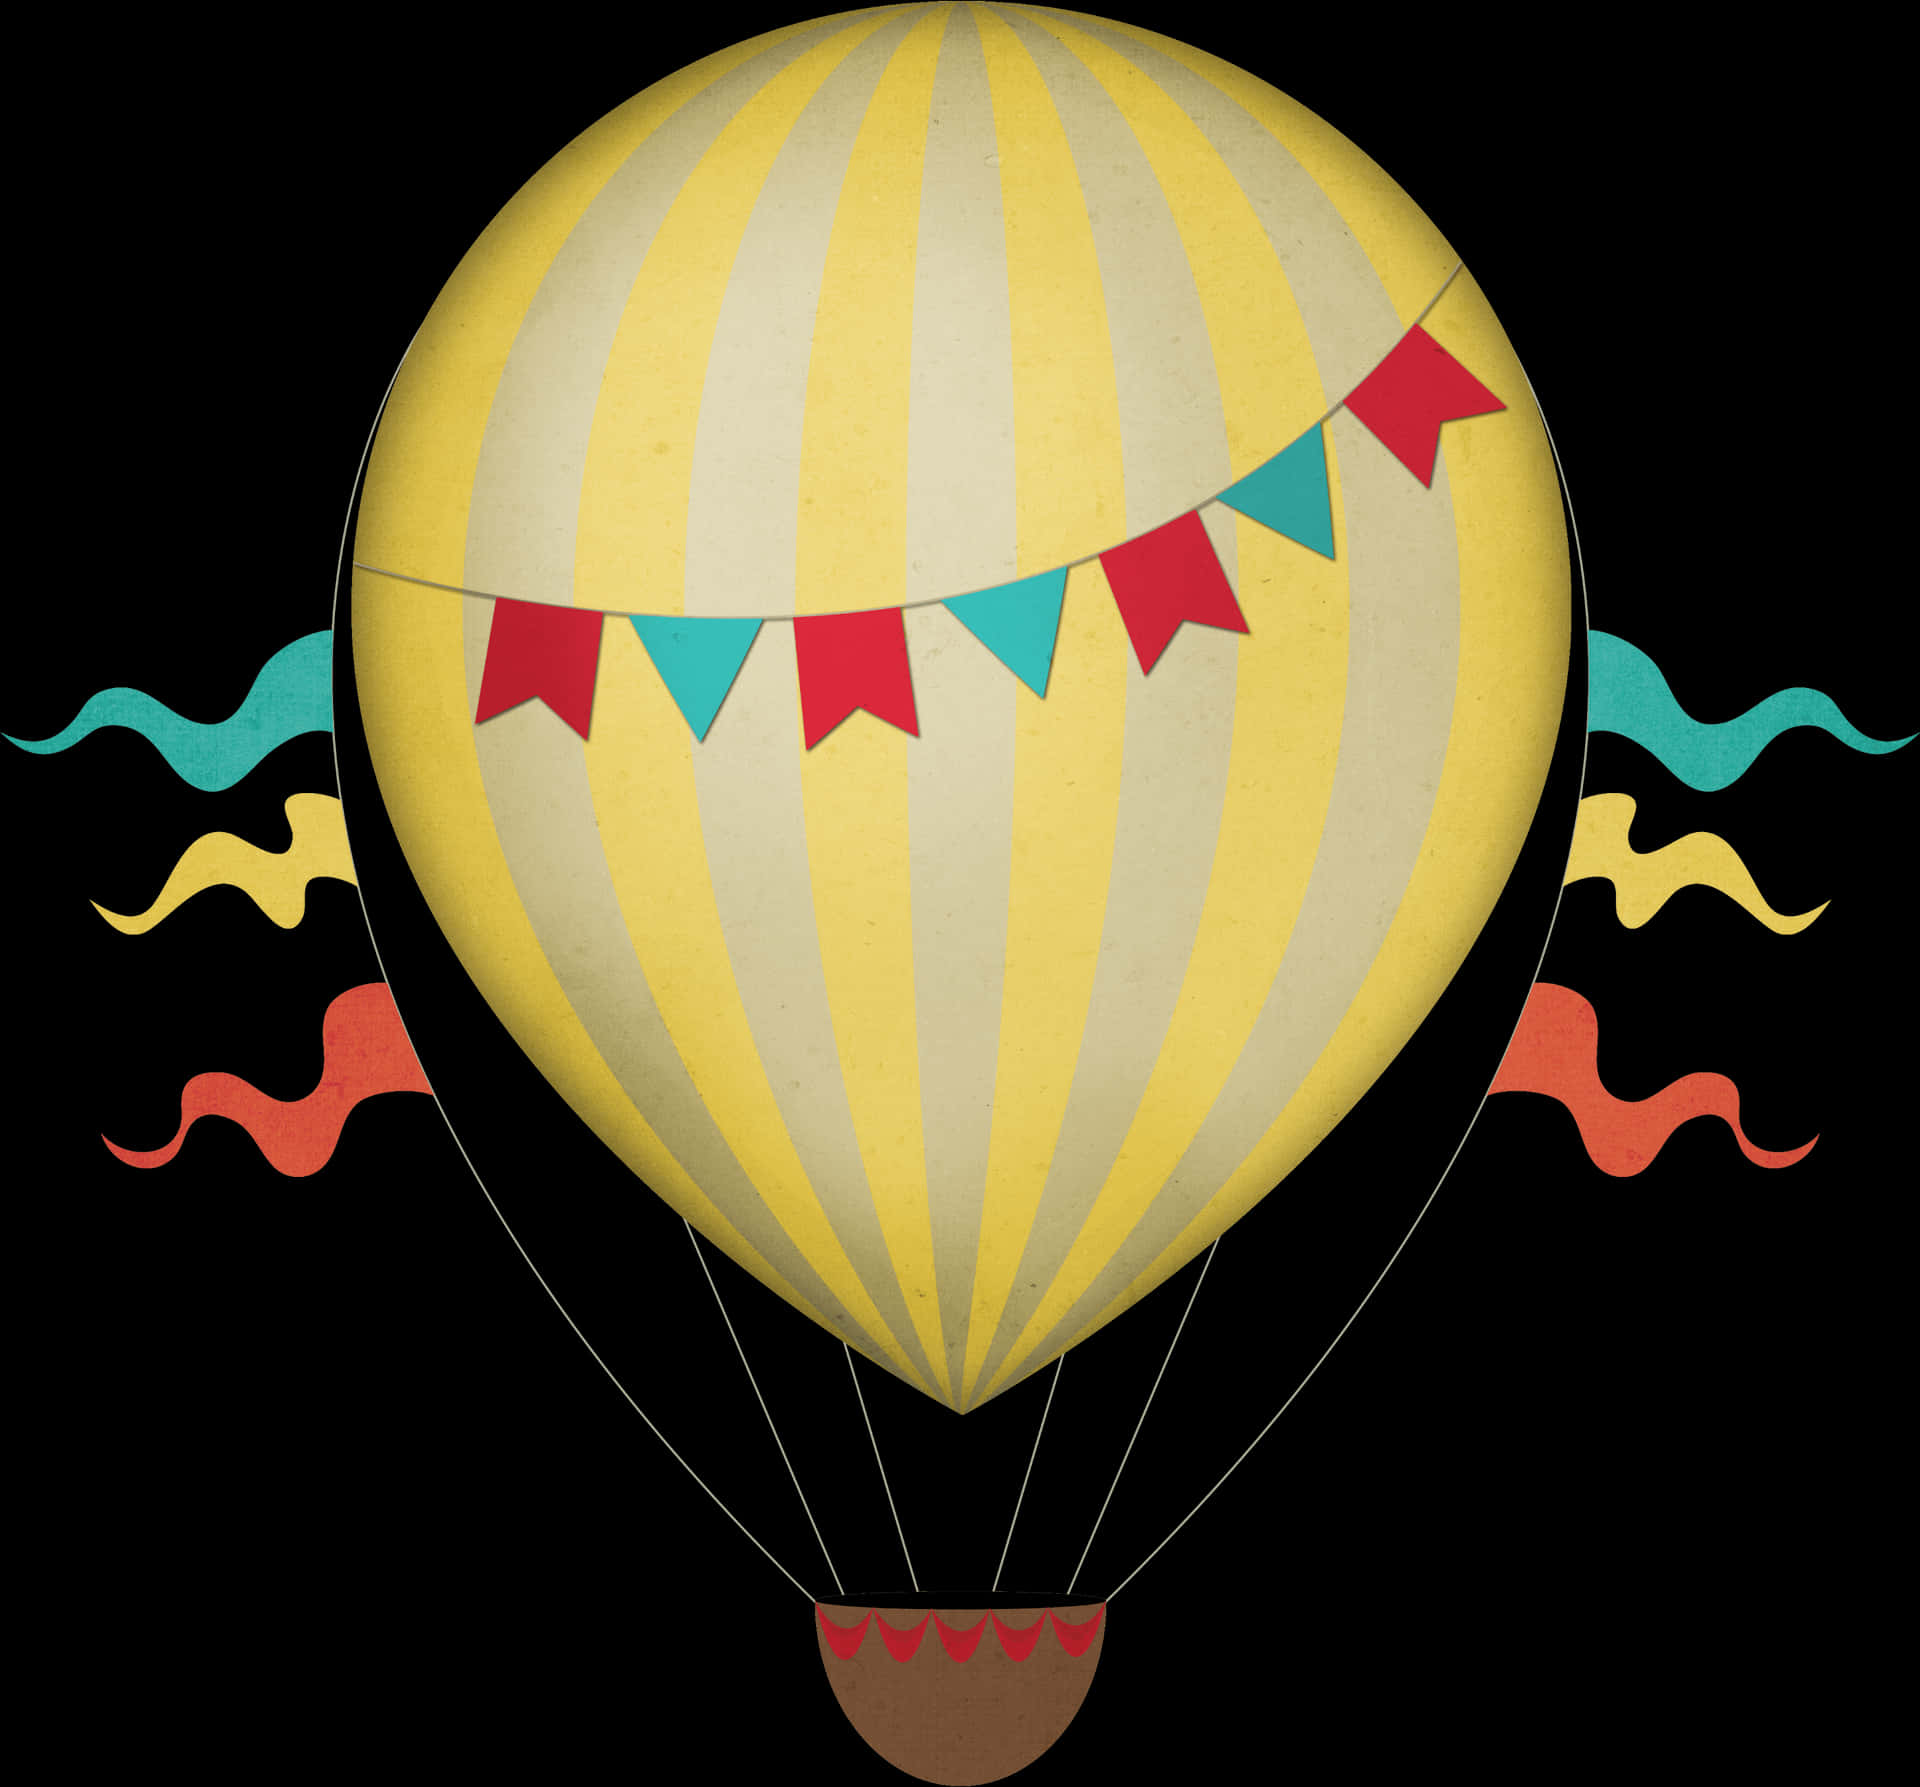 Vintage Style Hot Air Balloon Illustration PNG